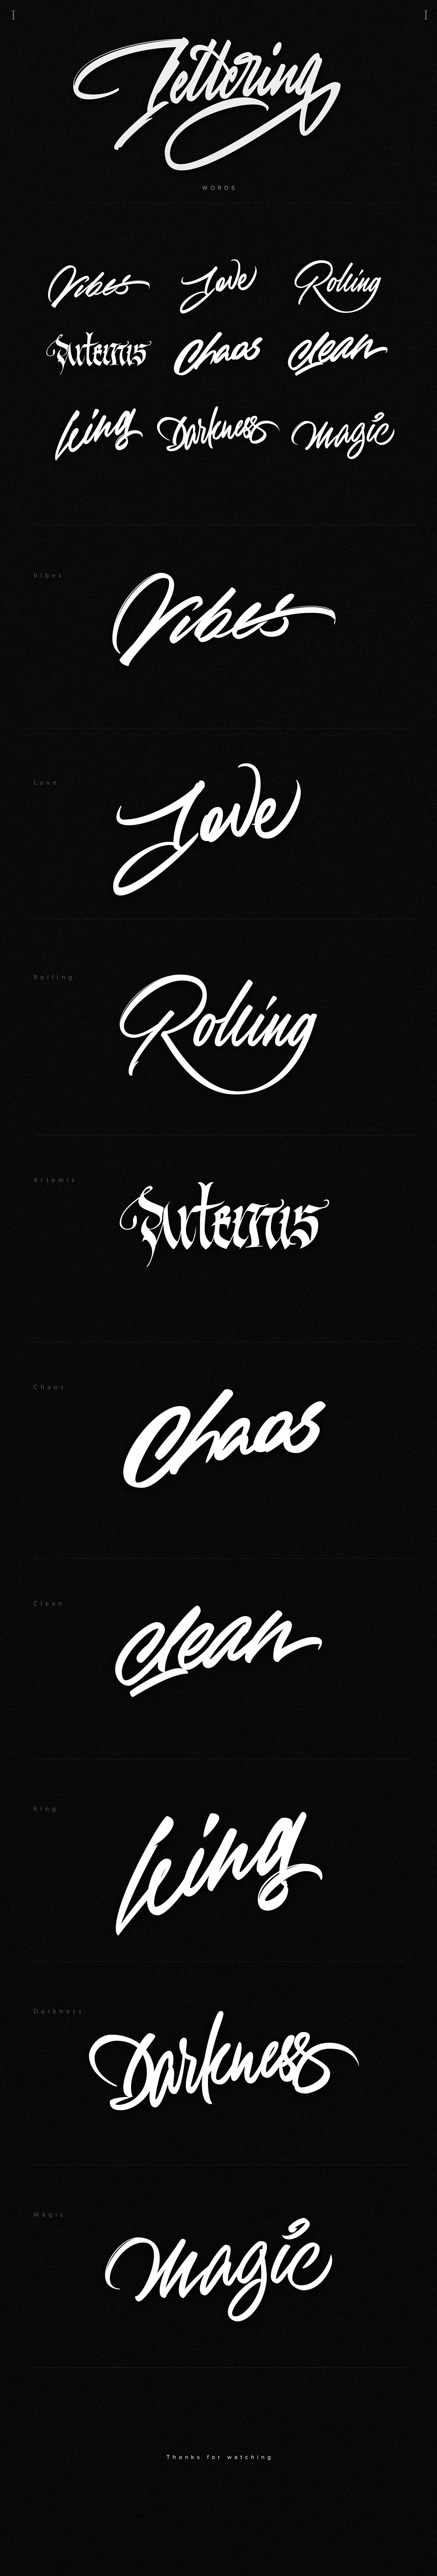 lettering Calligraphy   logo typography   word